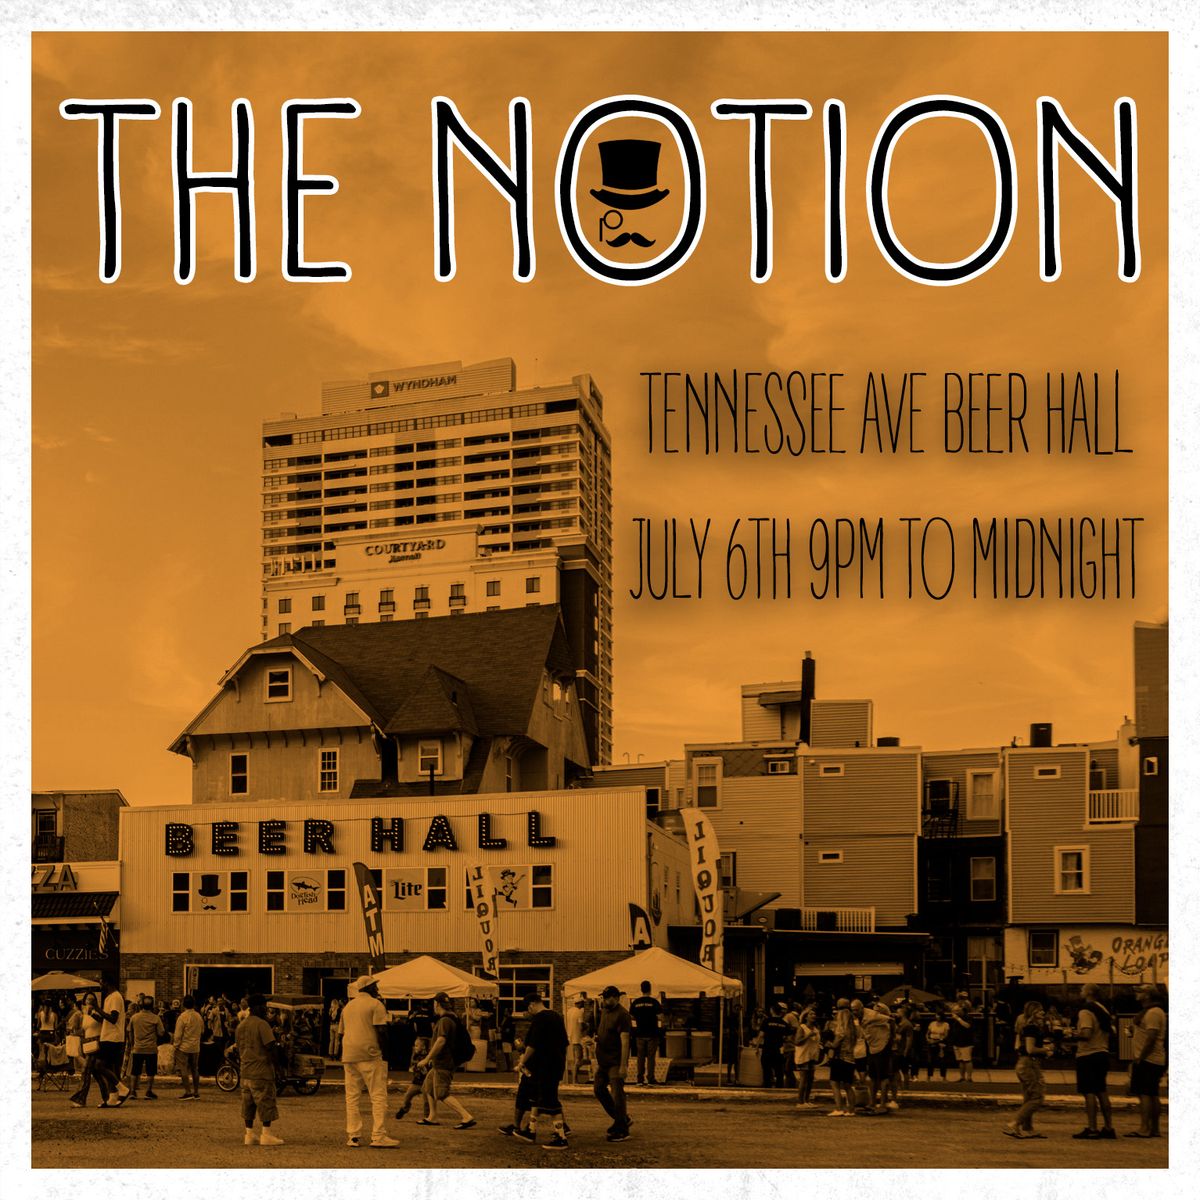 The Notion at Tennessee Ave Beer Hall